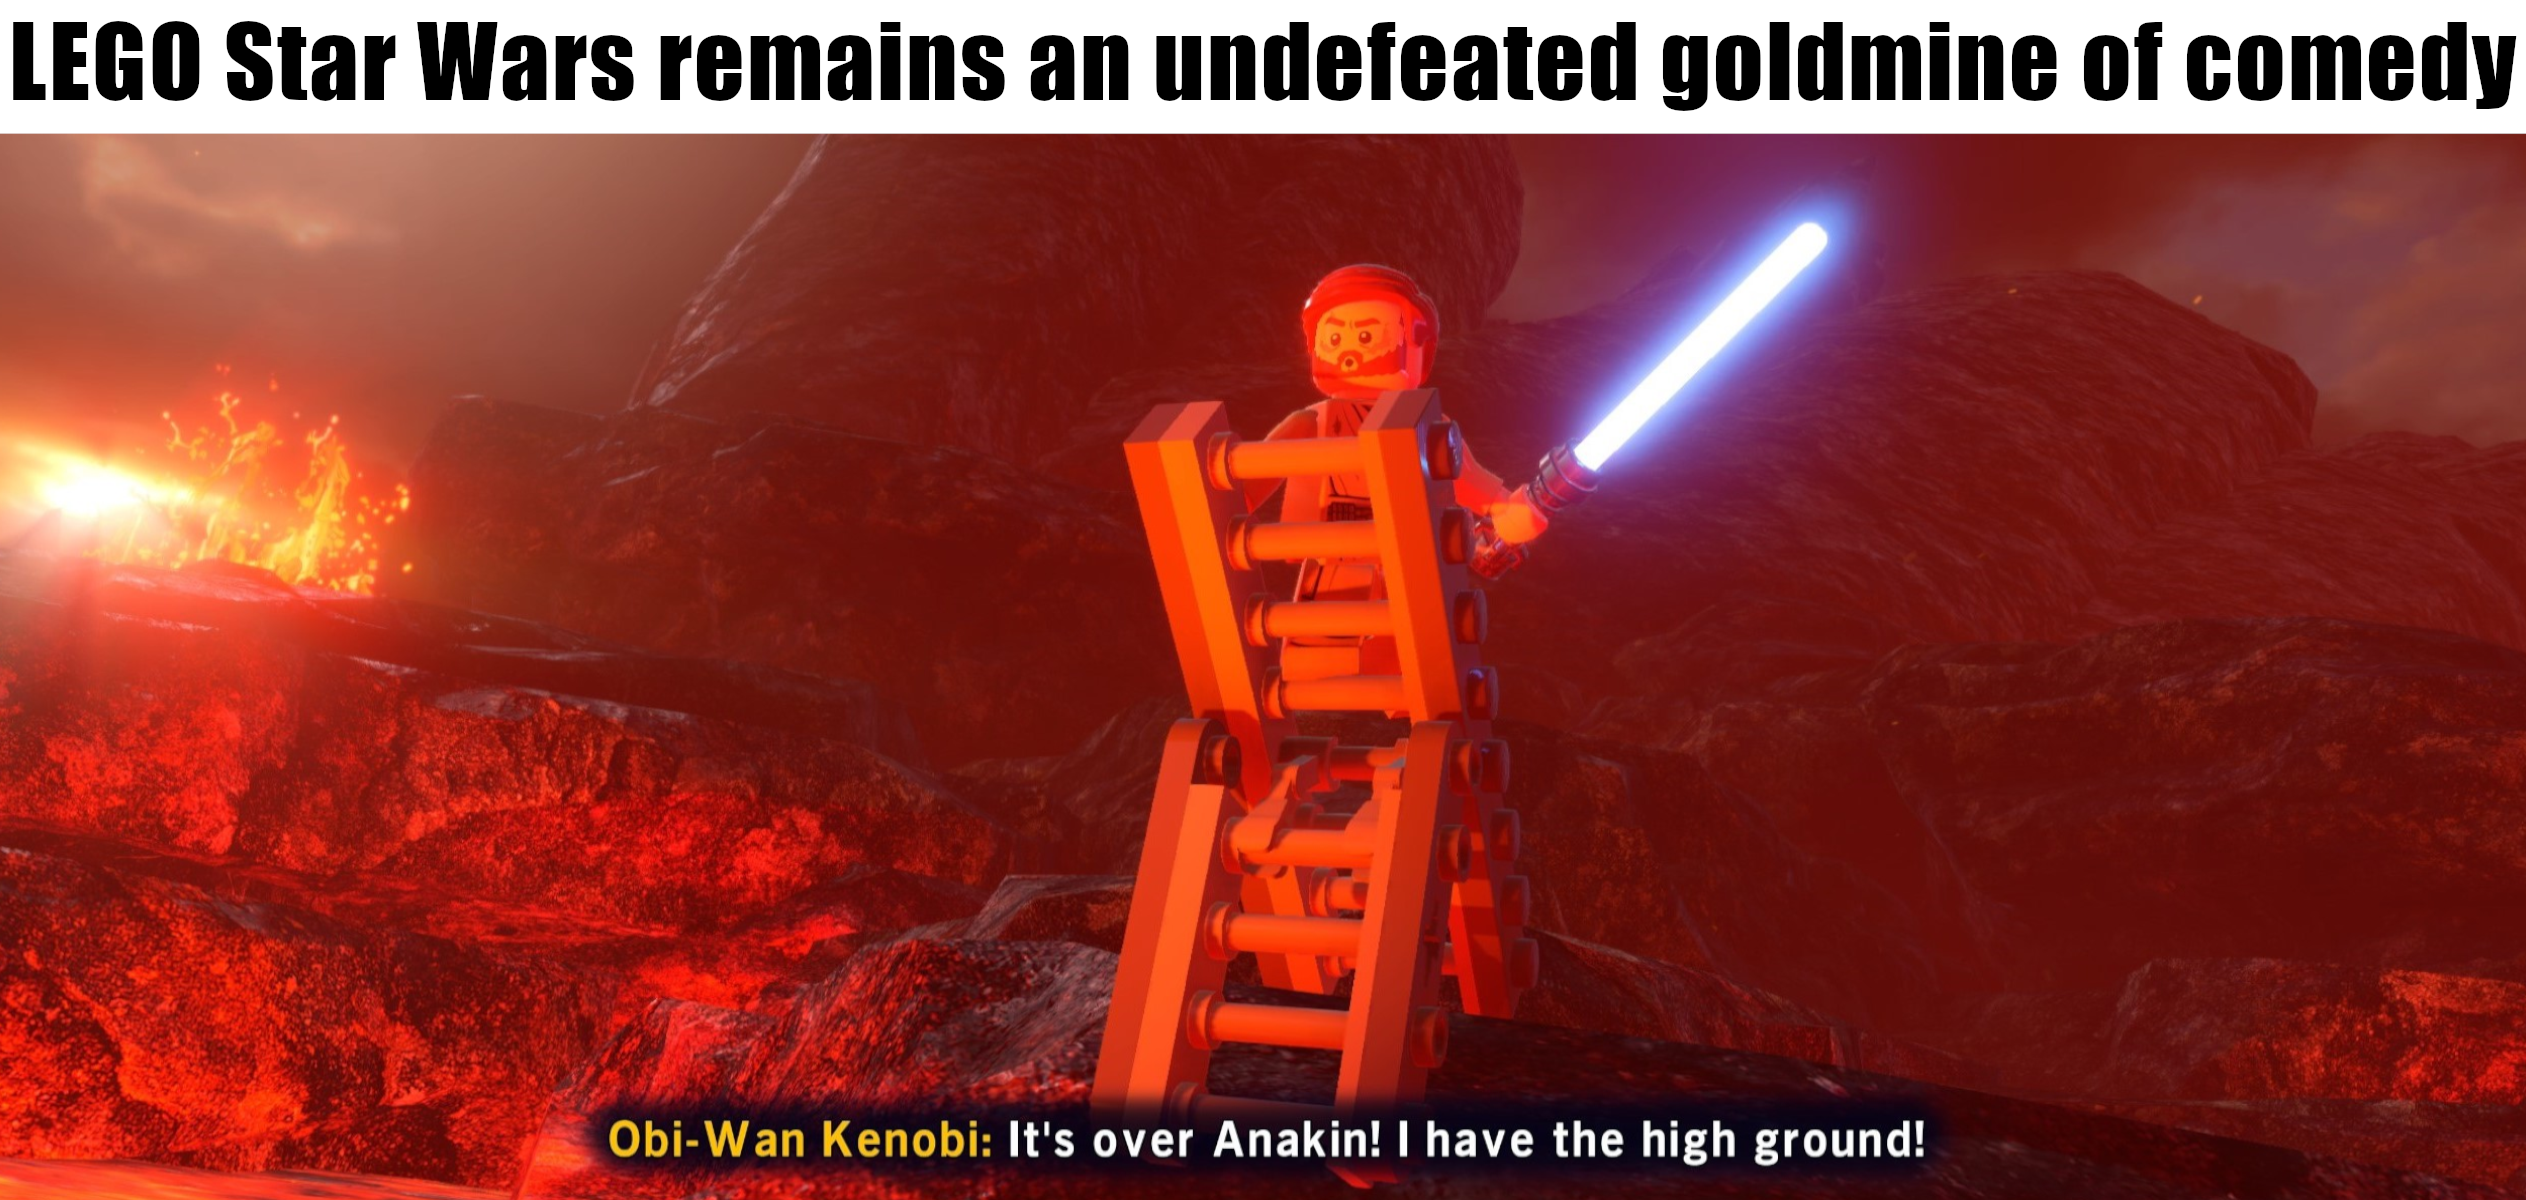 gaming memes - lego star wars the skywalker saga review - Lego Star Wars remains an undefeated goldmine of comedy ObiWan Kenobi It's over Anakin! I have the high ground!